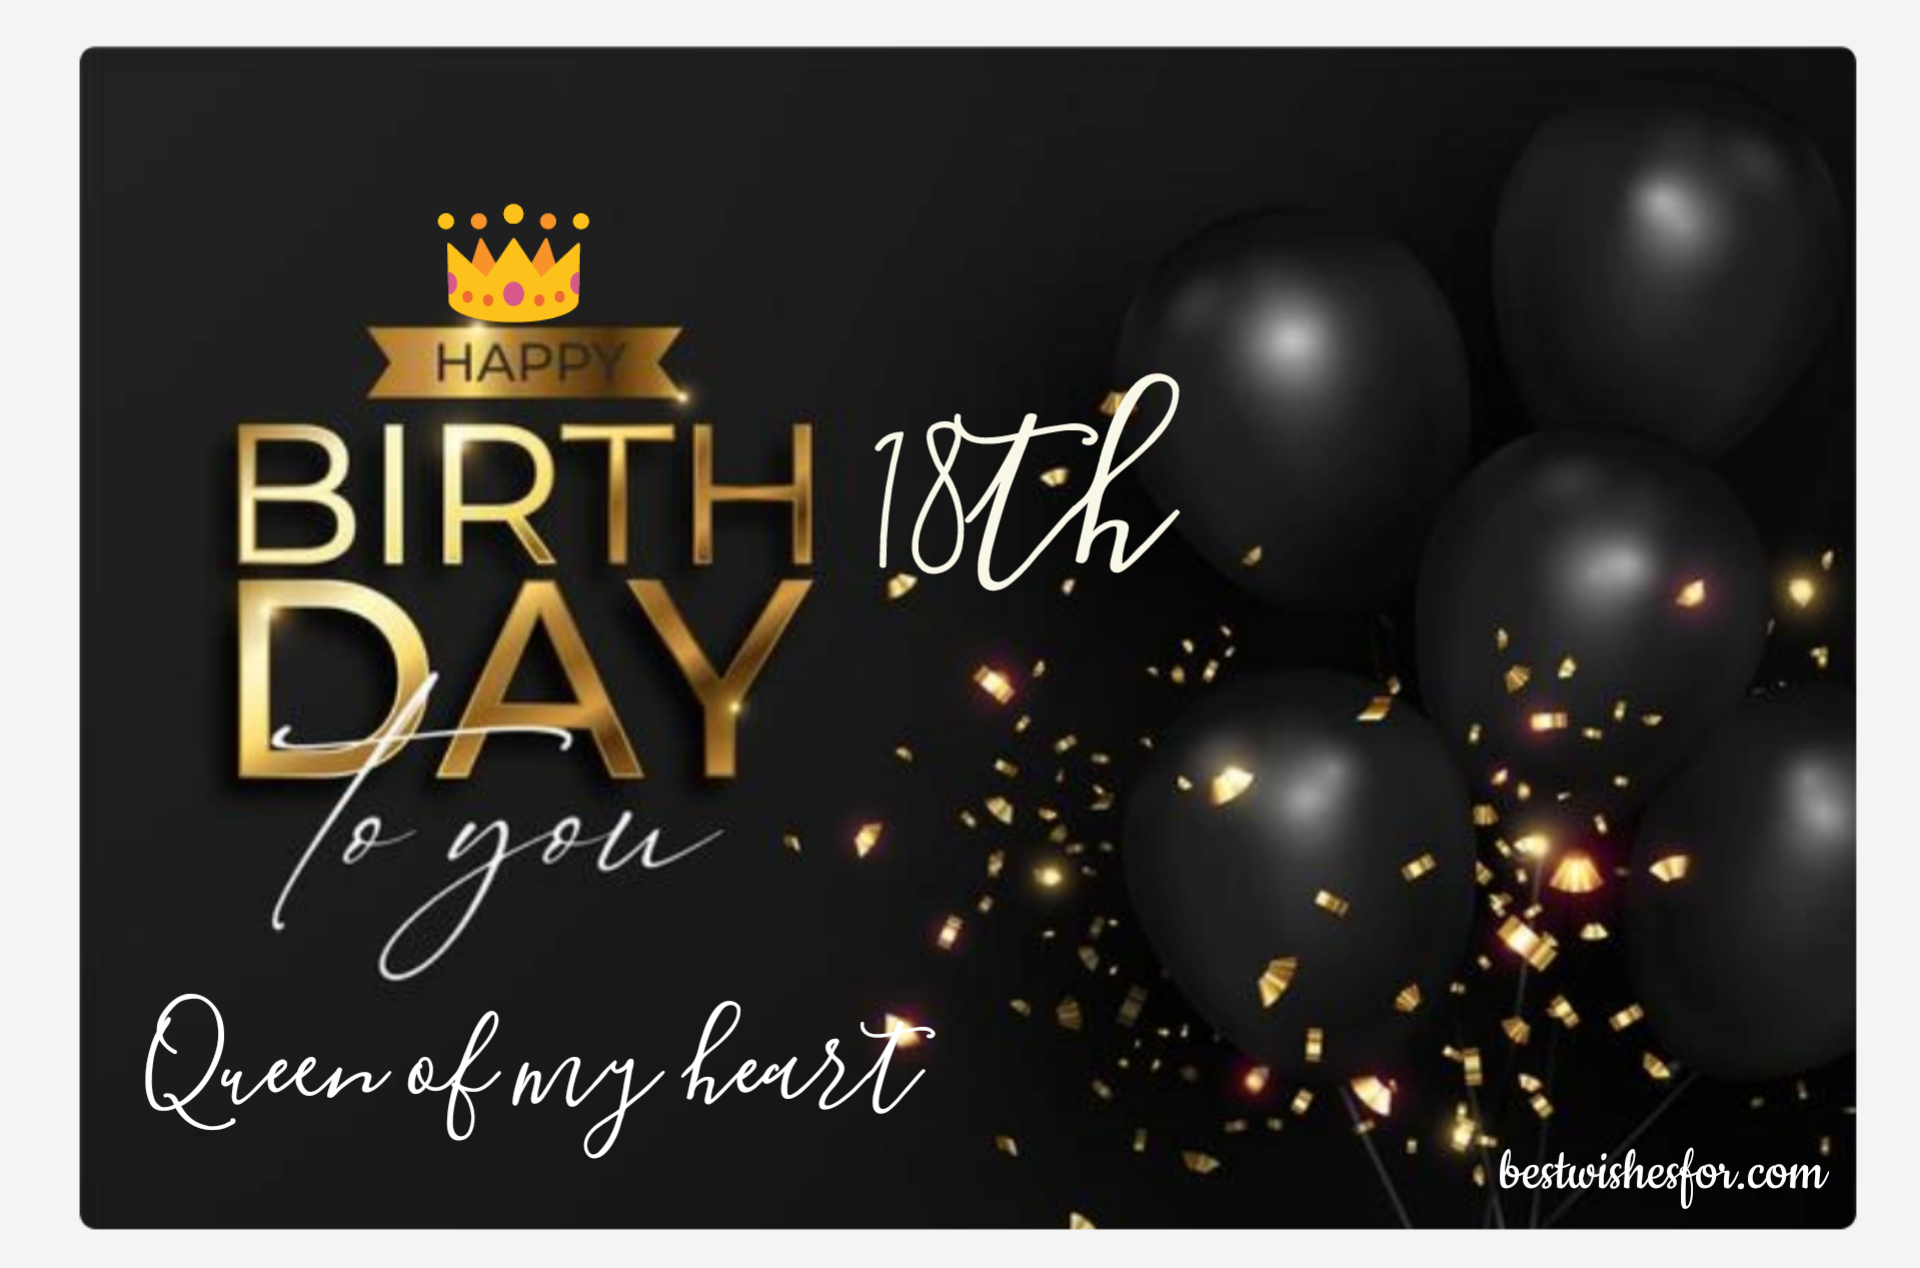 18th Birthday Wishes Quotes For Her | Best Wishes